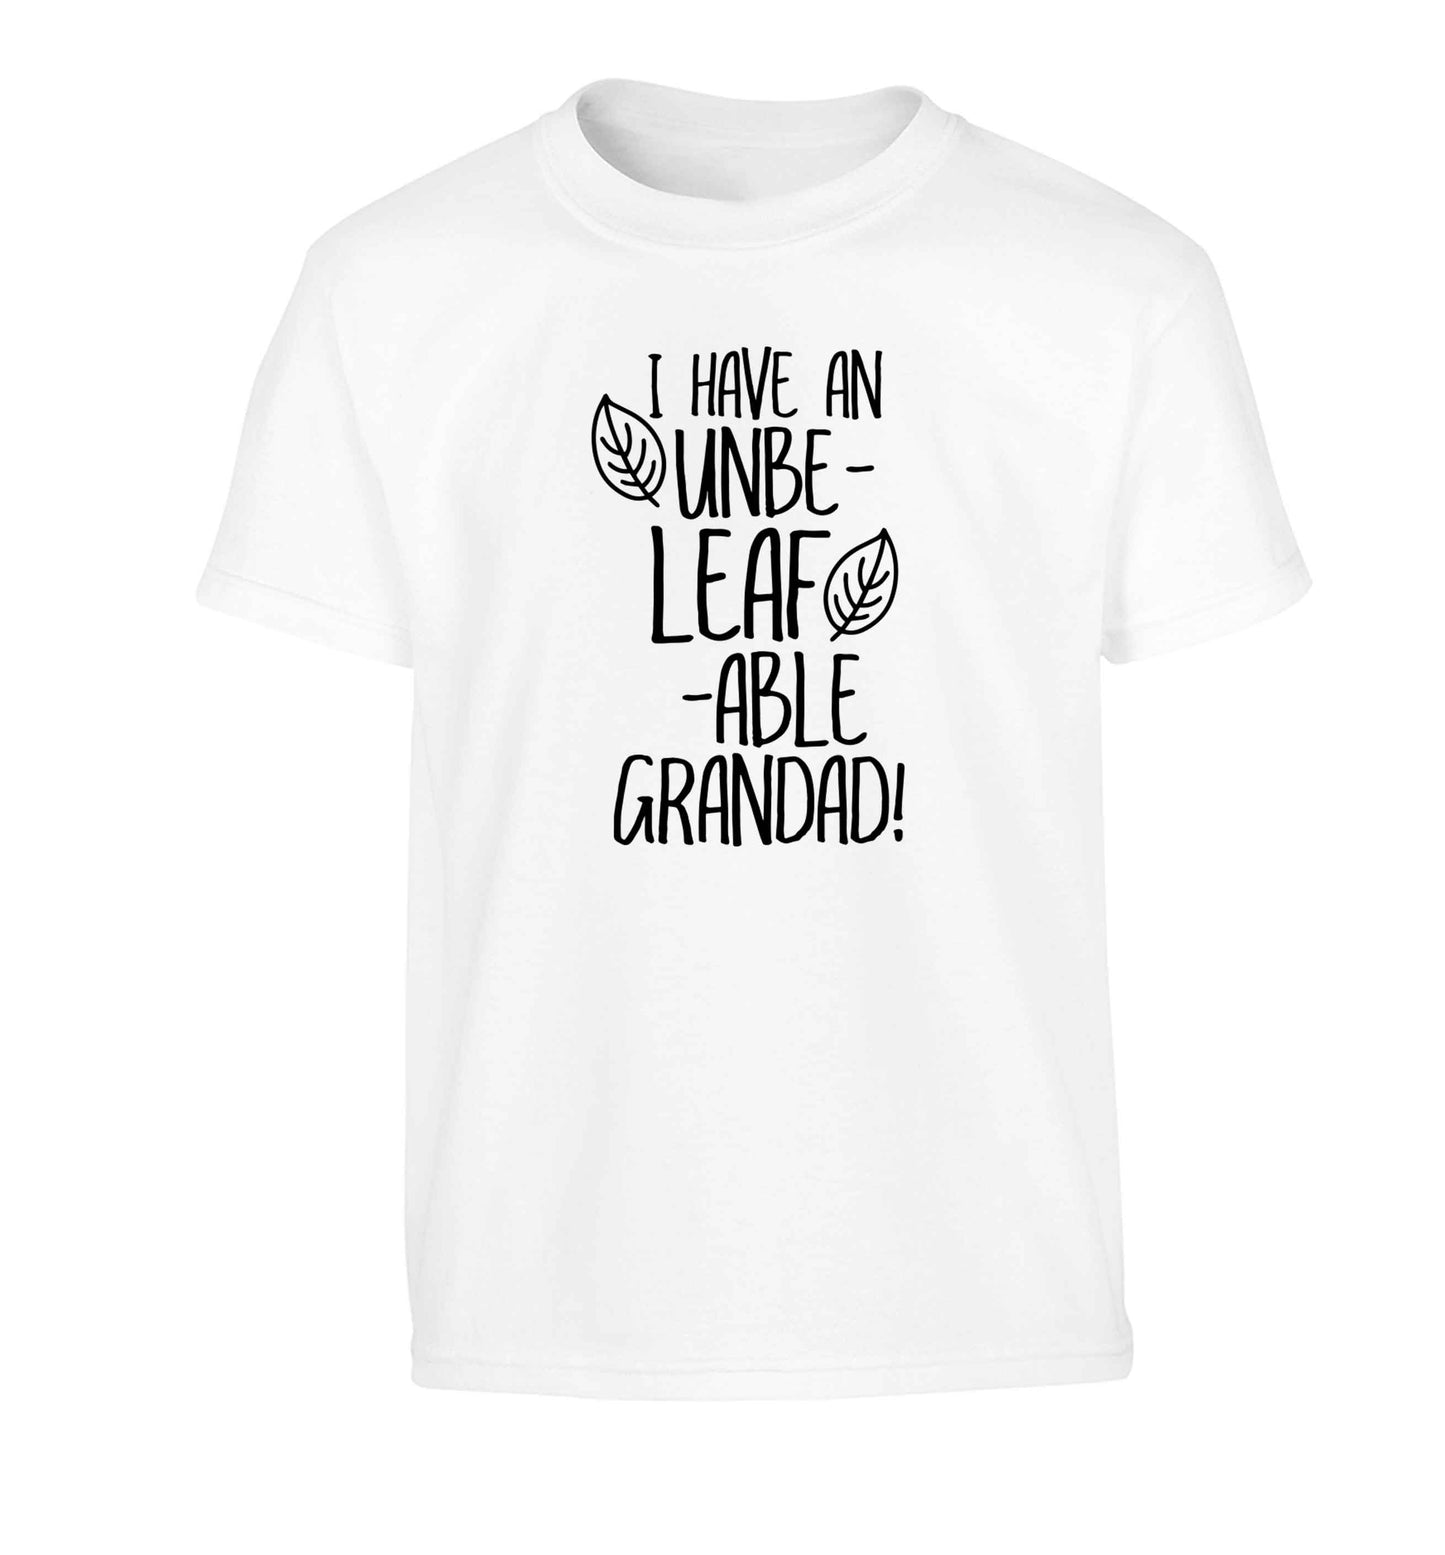 I have an unbe-leaf-able grandad Children's white Tshirt 12-13 Years